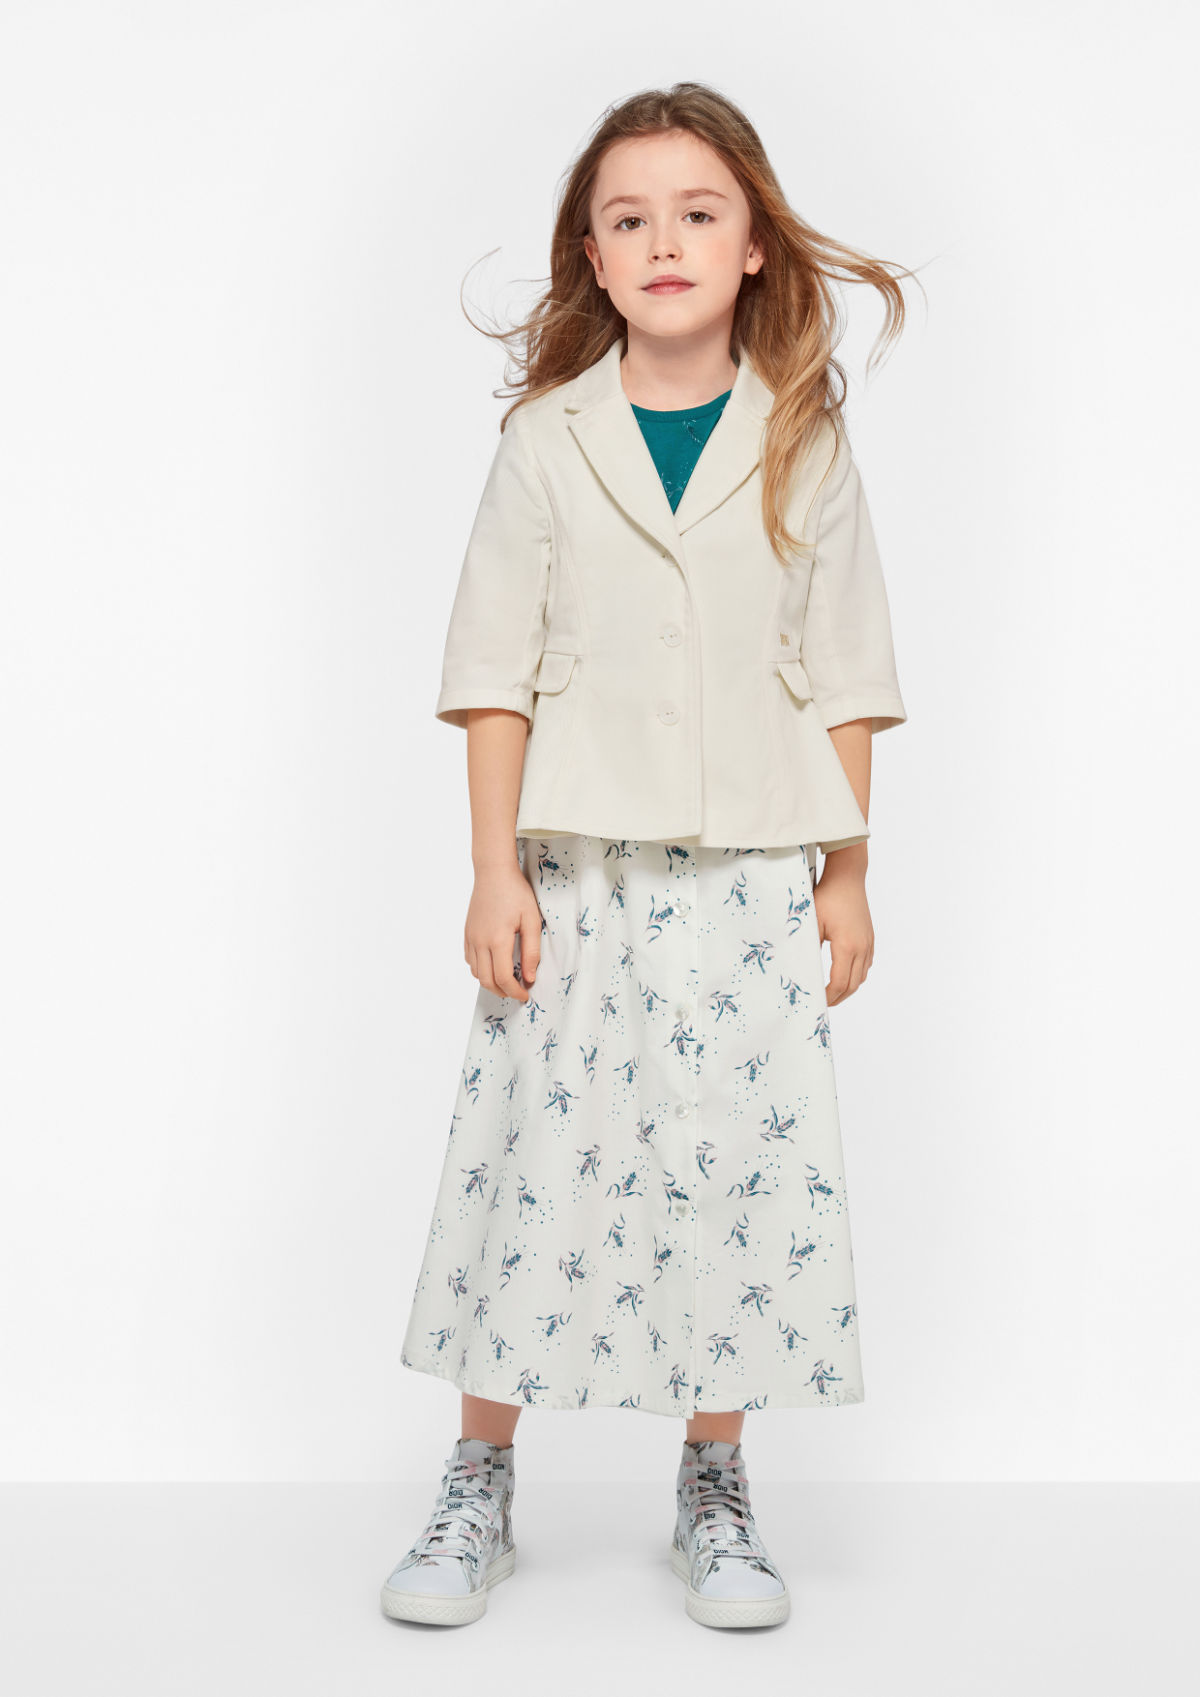 Dior Kids – Beautiful Ready-To-Wear Pre-Fall 2021 Collection